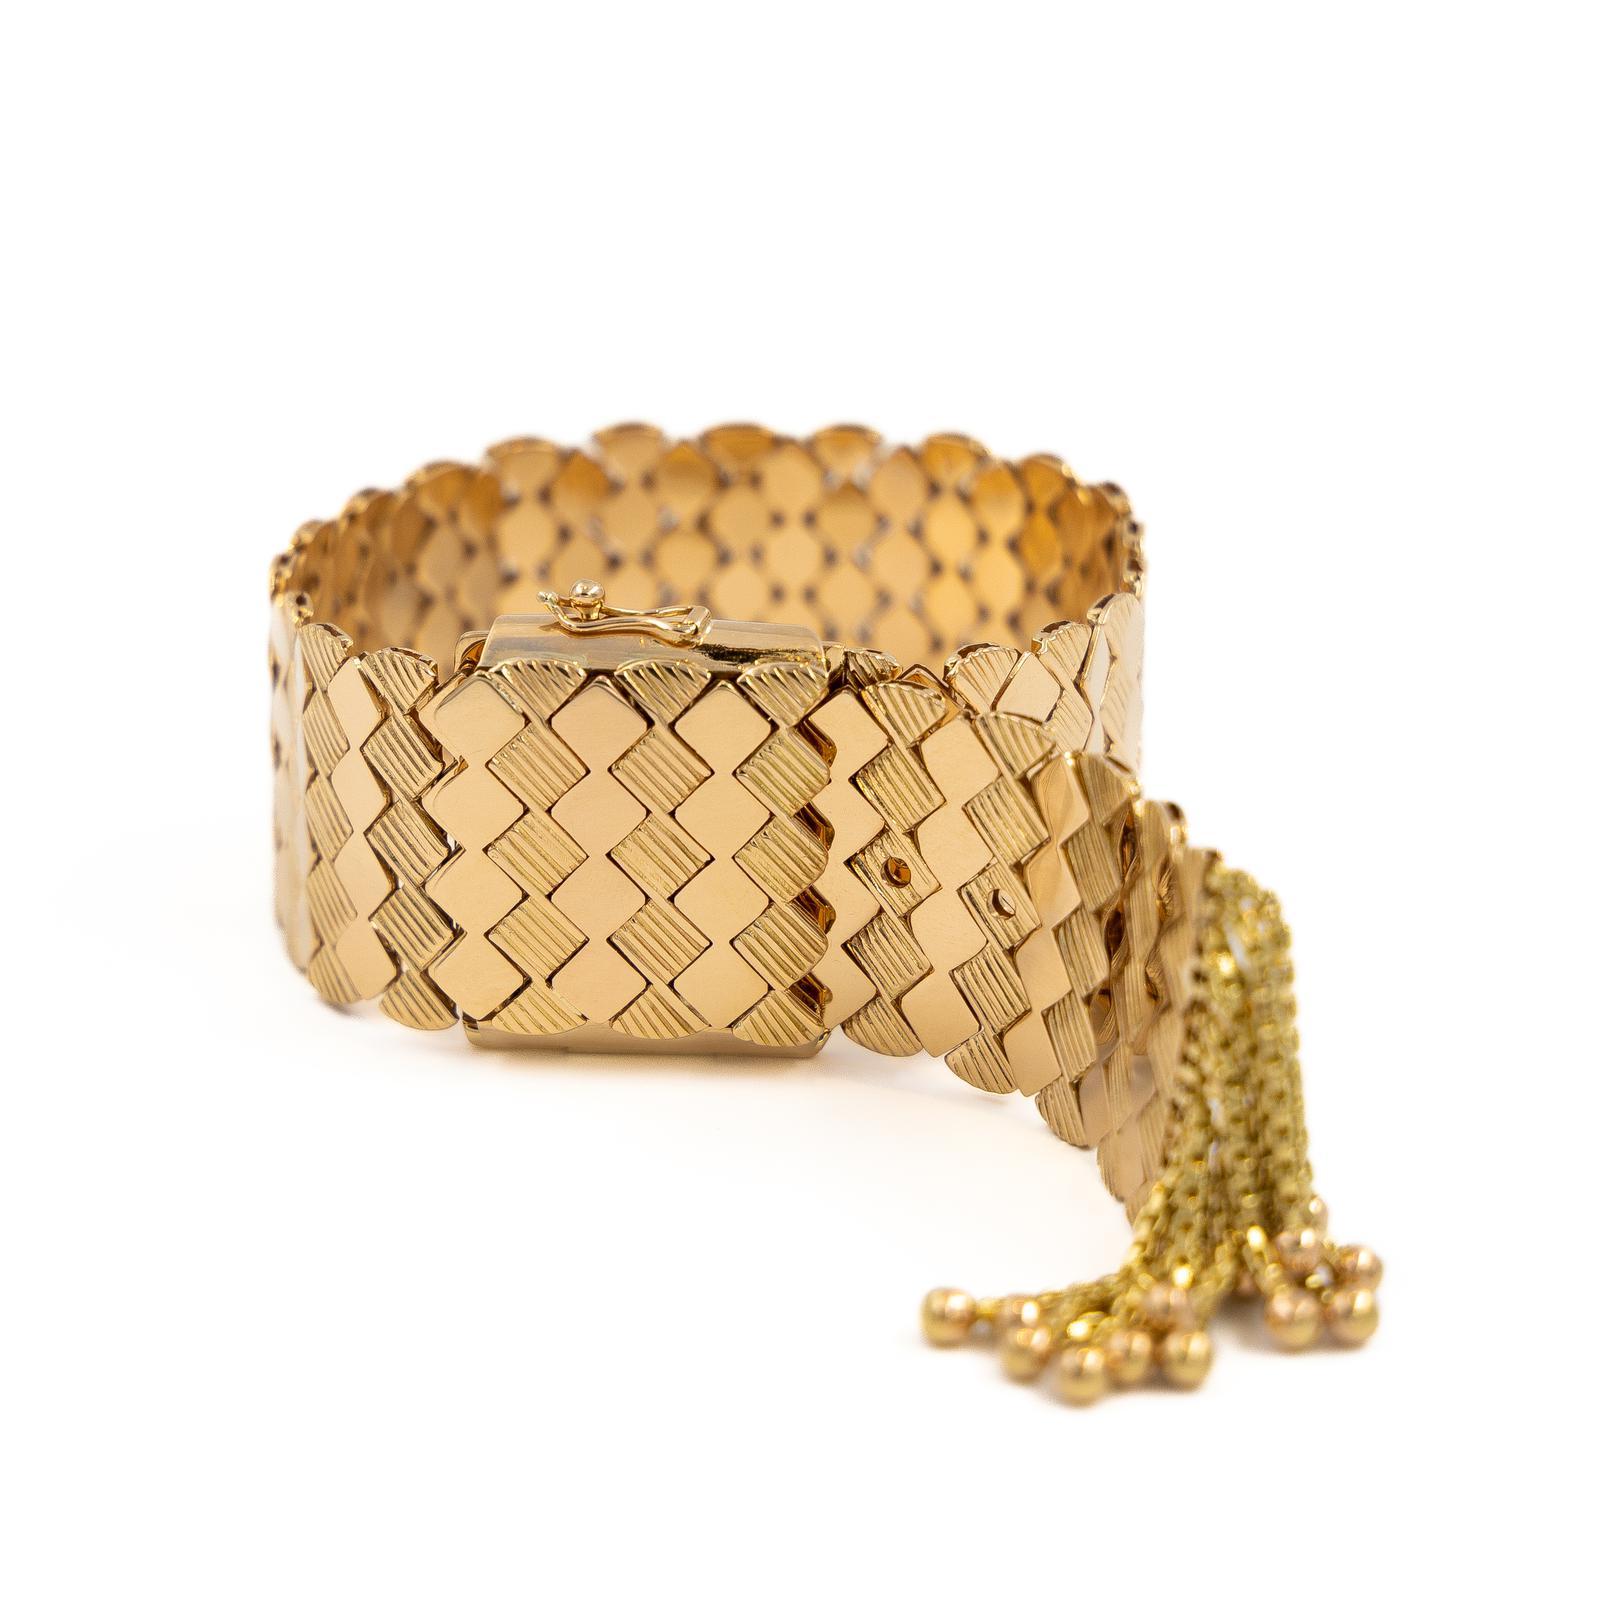 Cuff bracelet in yellow gold 750 thousandths (18 carats). adjustable belt system. eight safety. Wrist size: 24 cm. Width: 2.60 cm. Total weight: 93.27. Owl hallmark. Excellent condition
